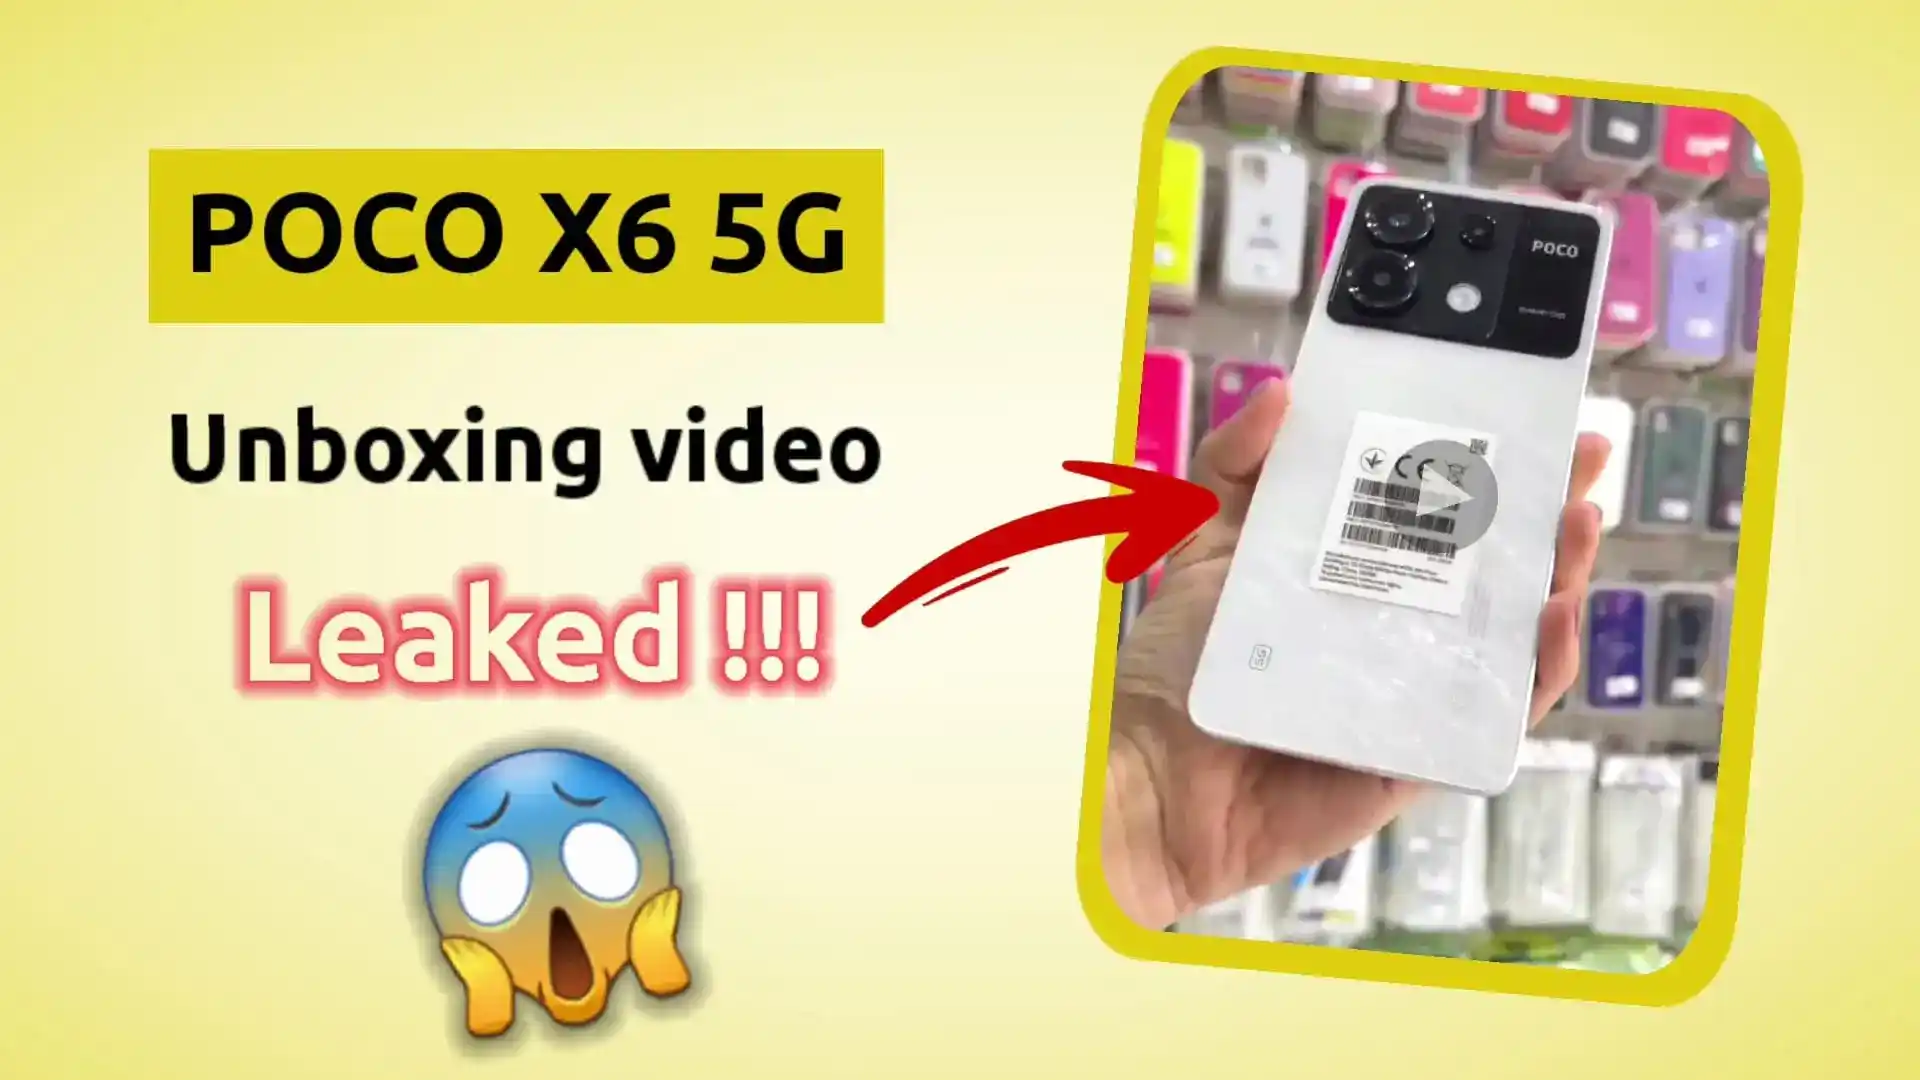 Poco X6 5G Unboxing Video Suggests Design, Specifications Ahead of January  11 Launch